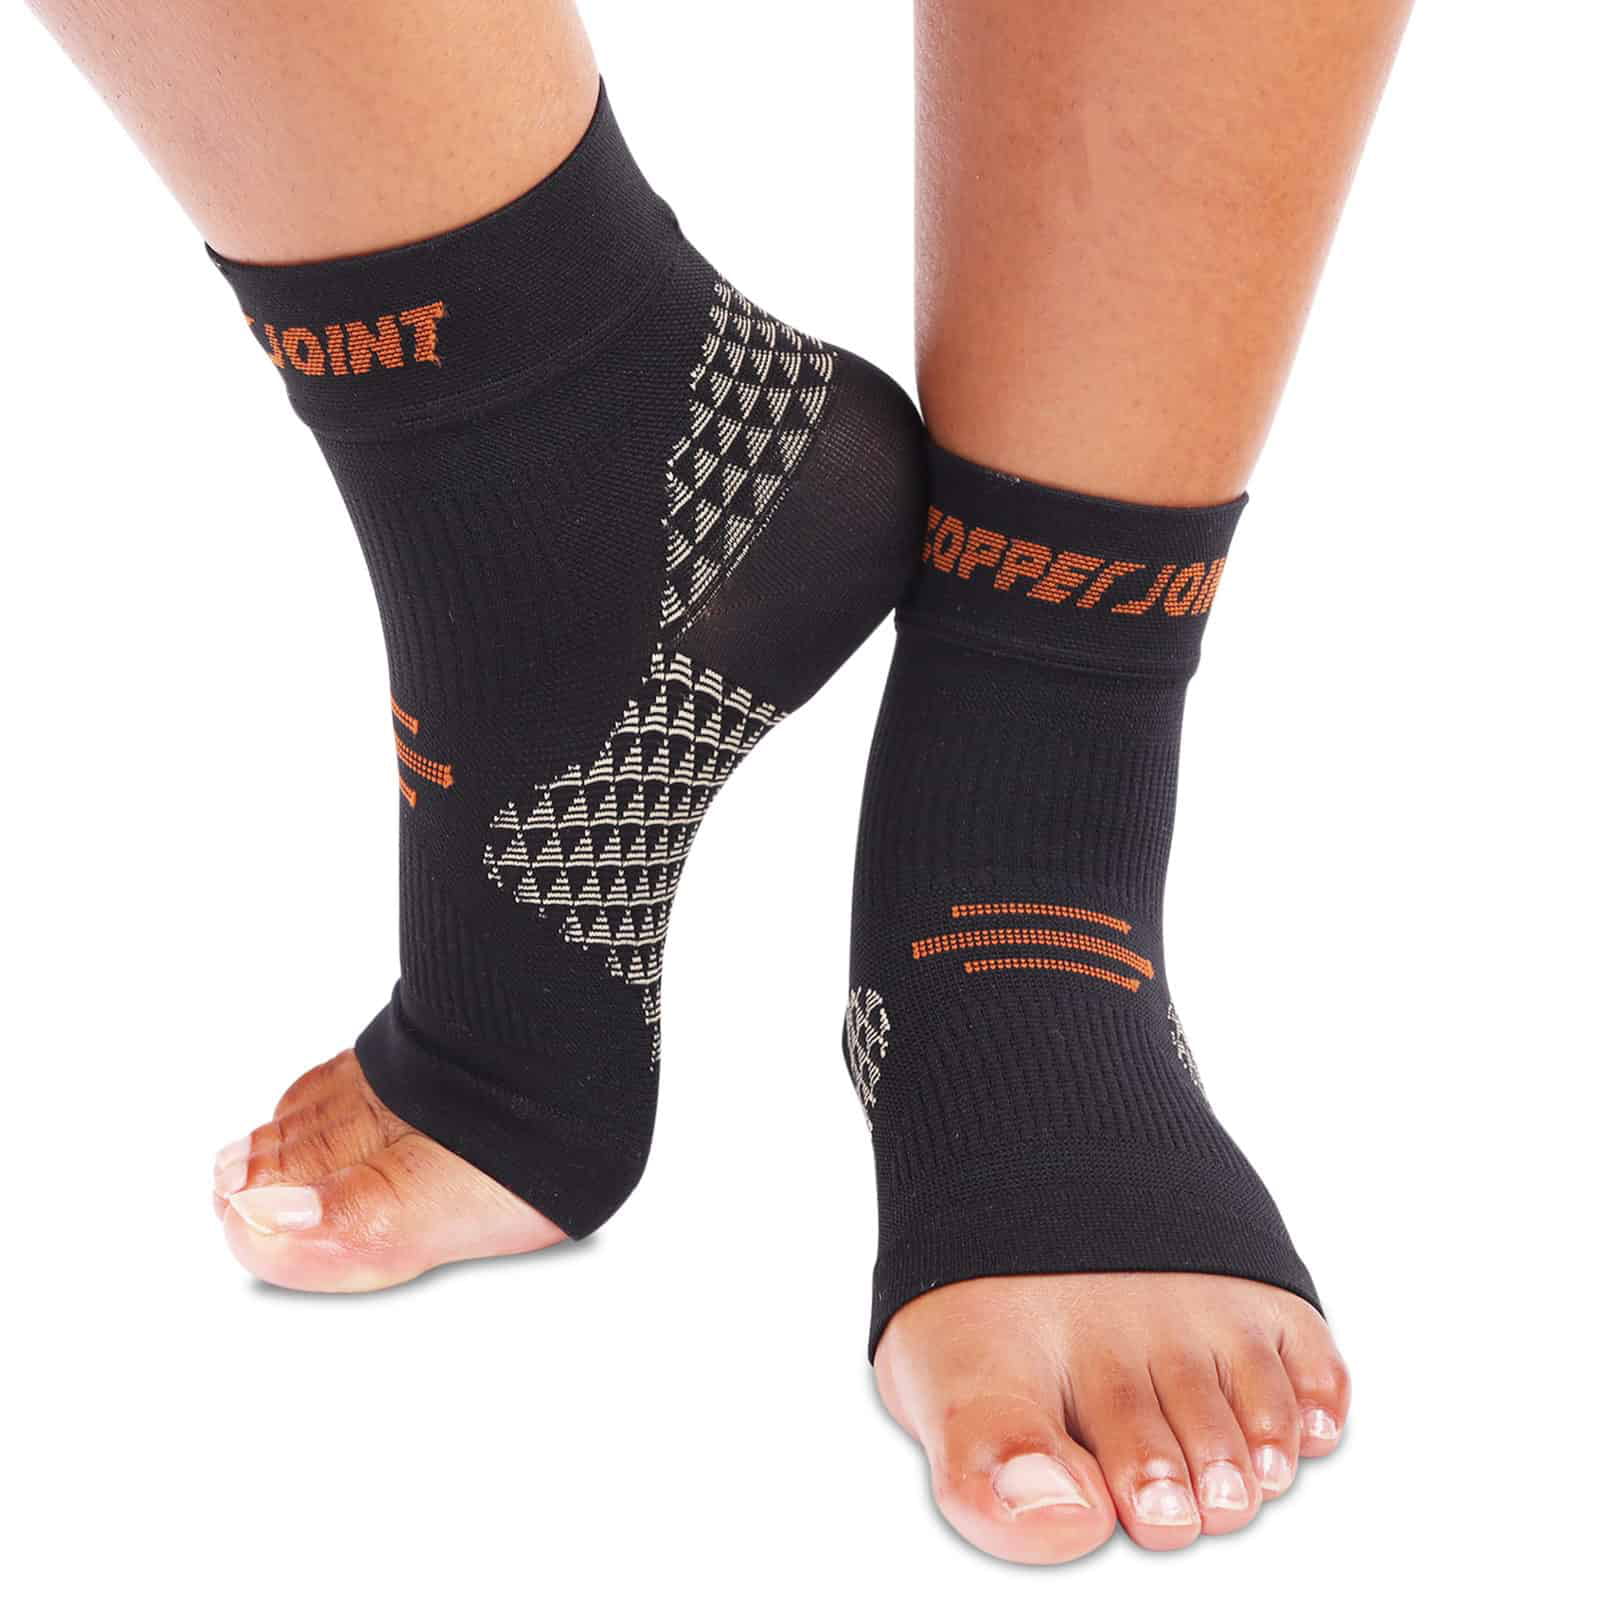 CopperJoint Arch Support Compression Socks for Plantar Fasciitis Foot